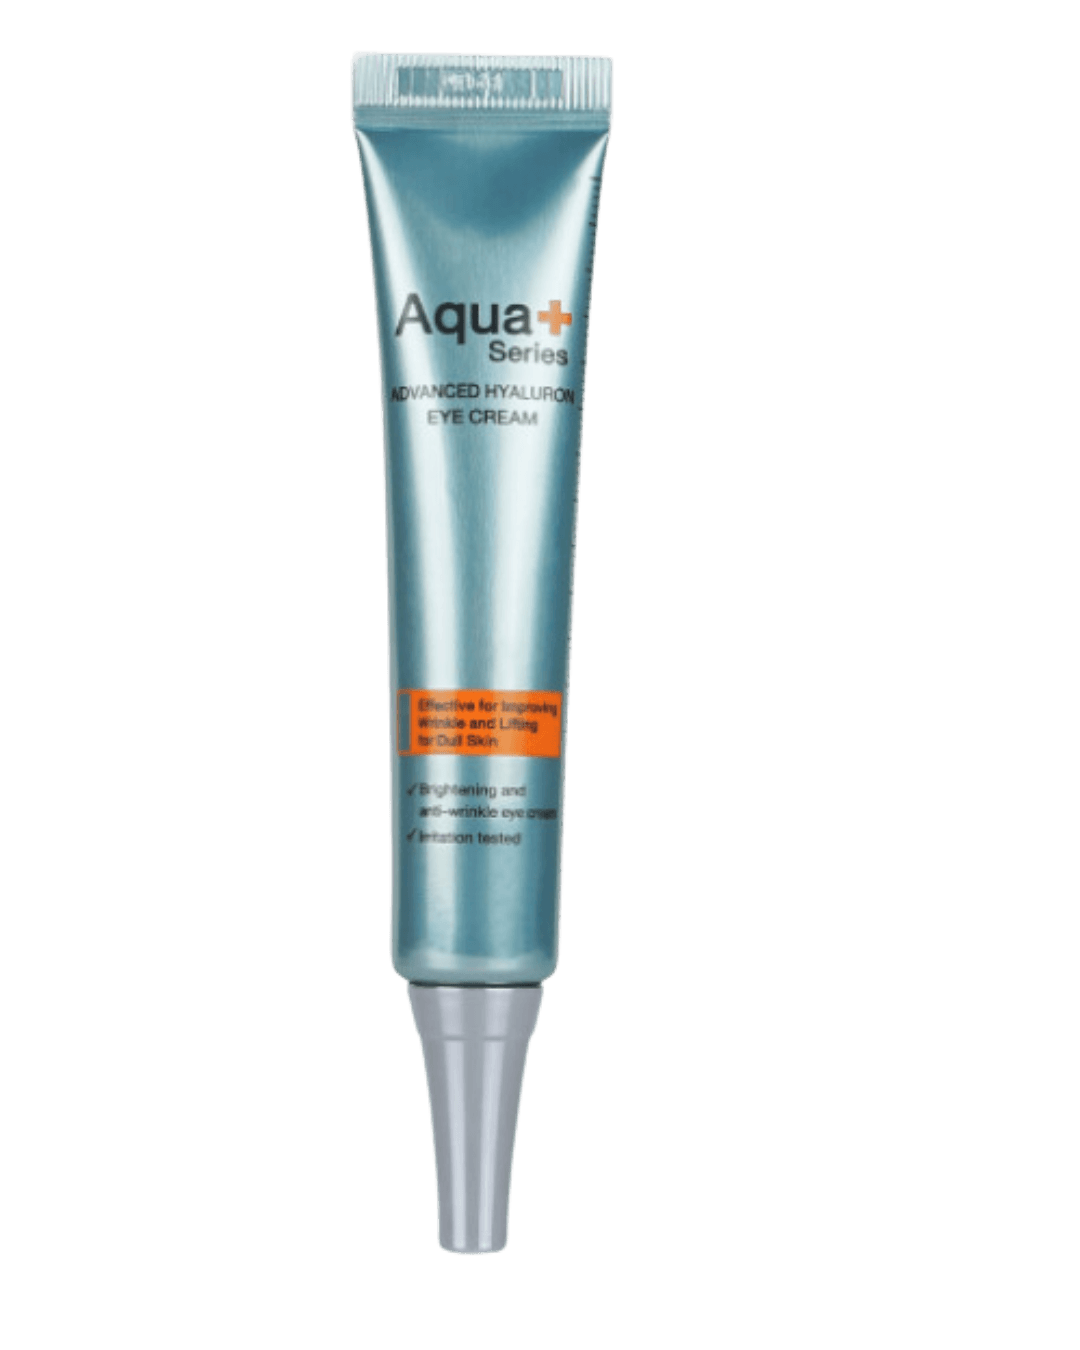 Daily Vanity Beauty Awards 2024 Best Skincare Aqua+ Series Advanced Hyaluron Eye Cream Voted By Beauty Experts